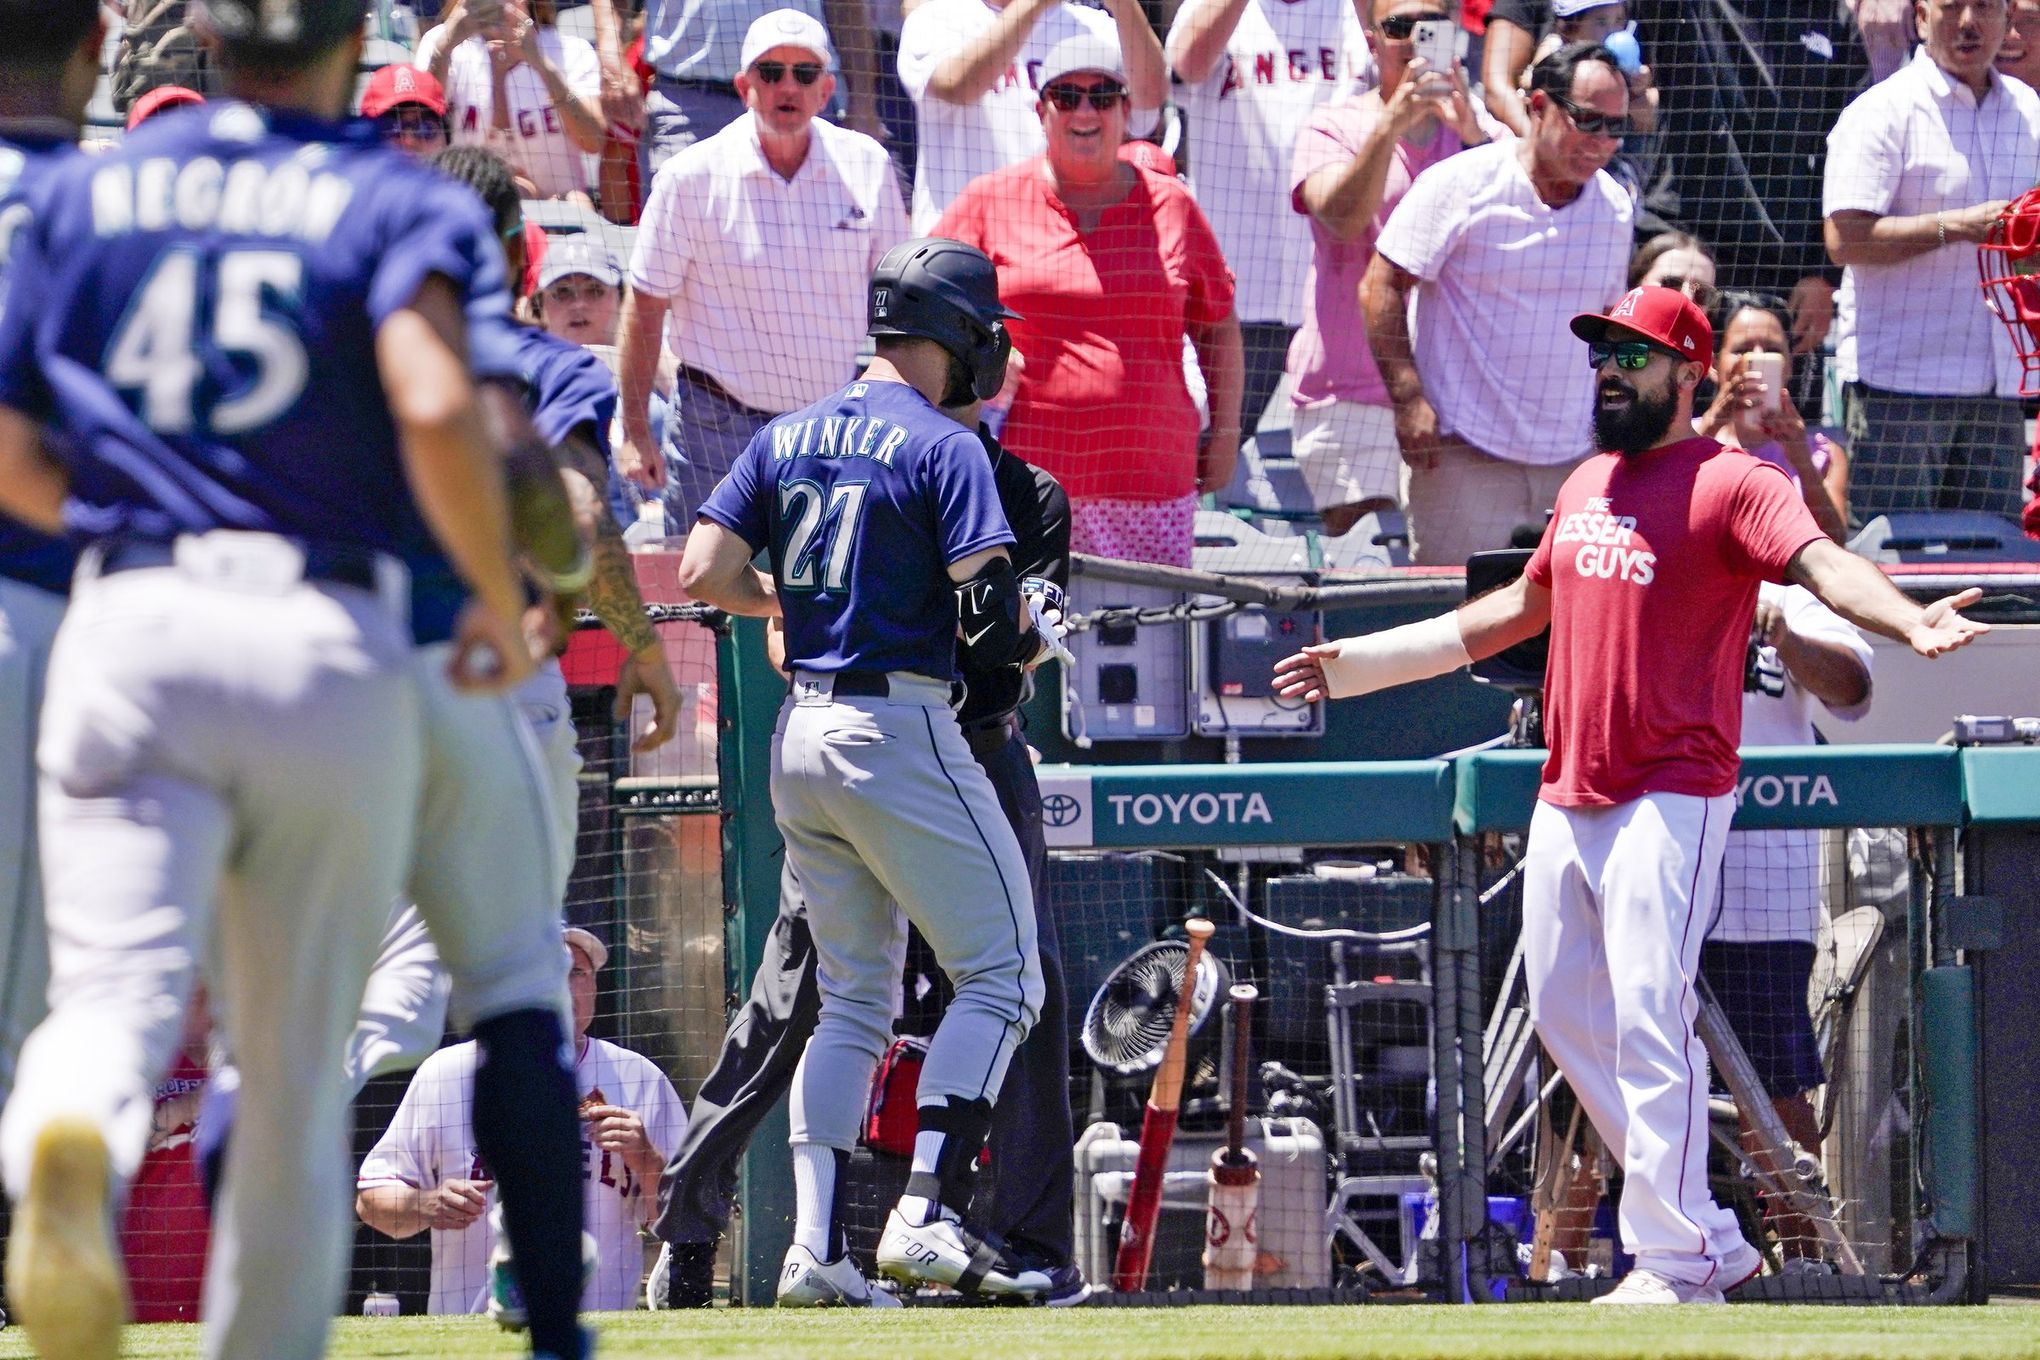 In aftermath of brawl, Mariners have one injury and three